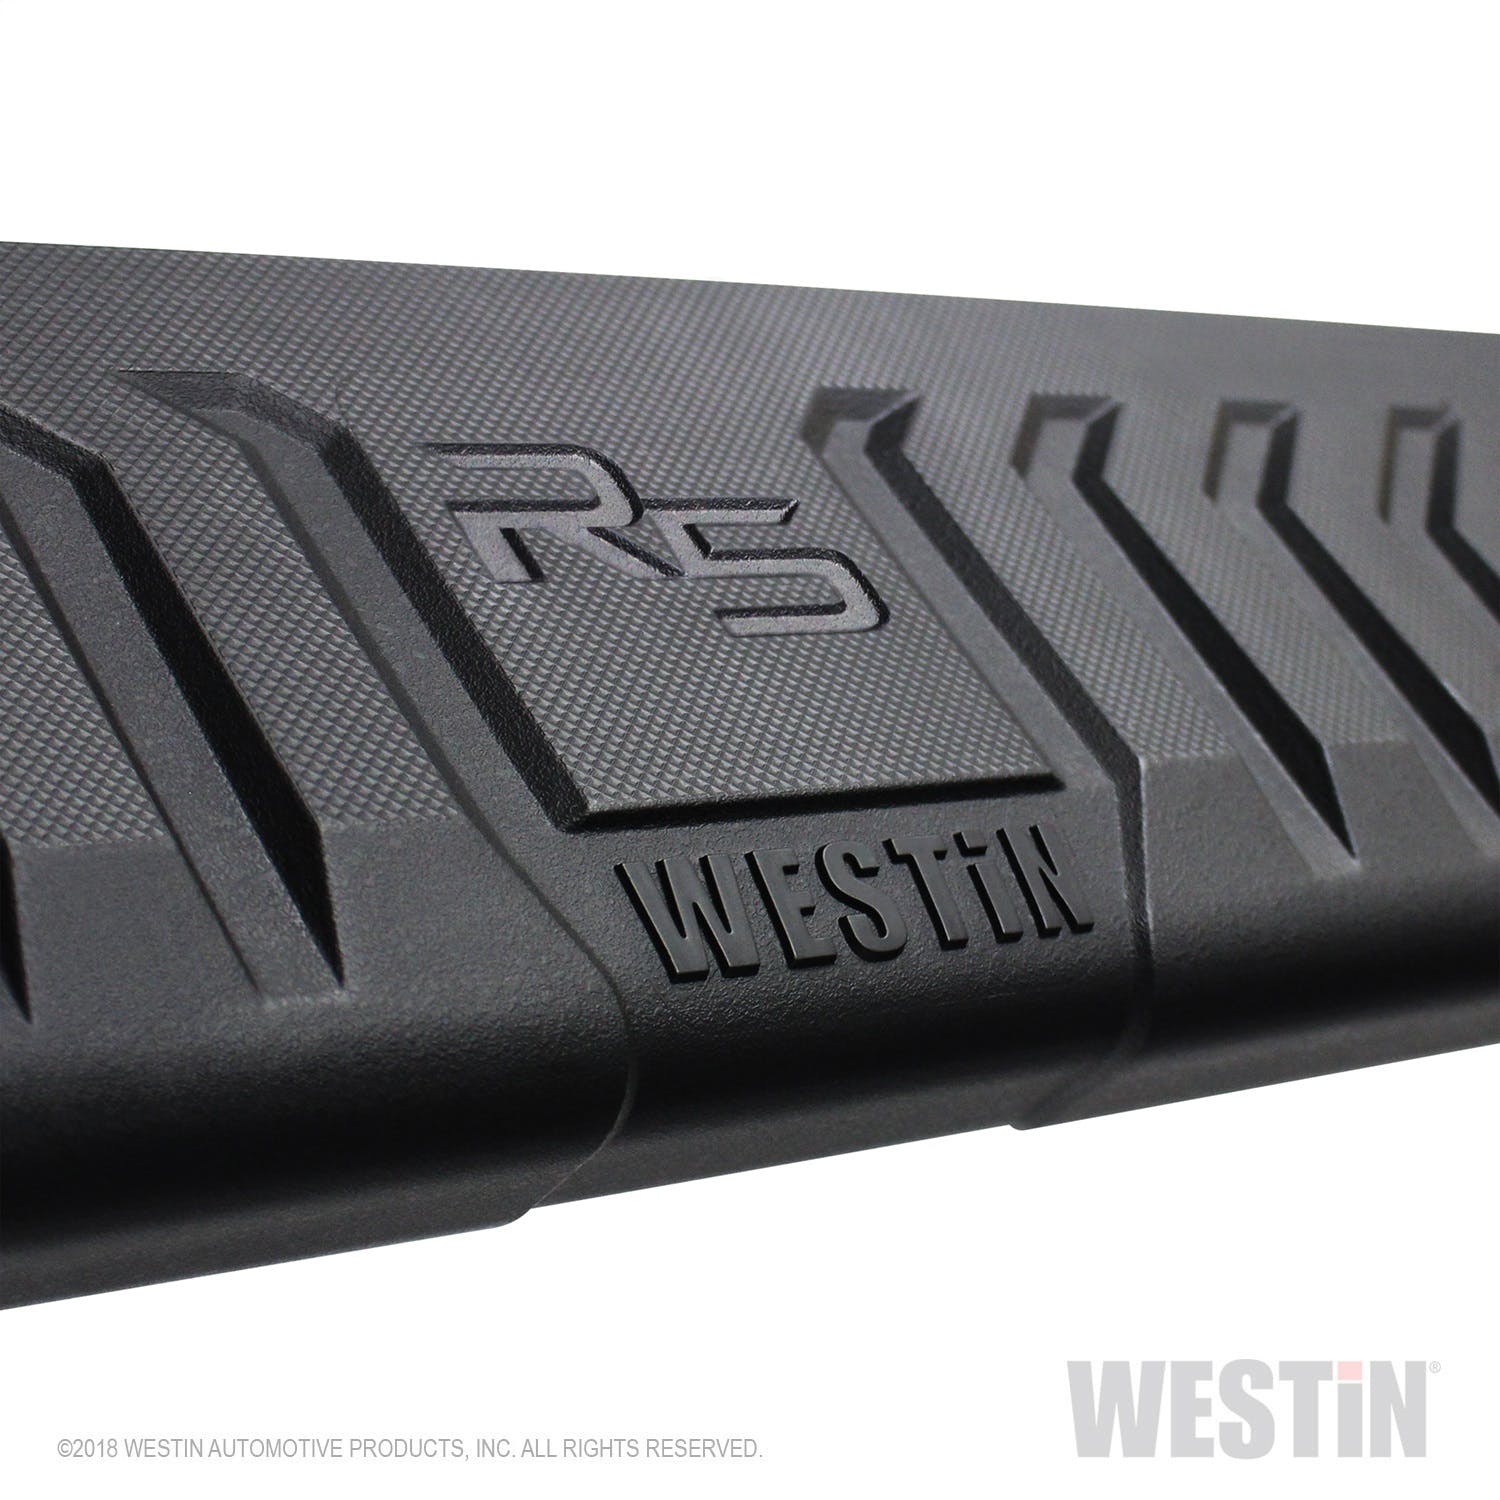 Westin Automotive 28-534320 R5 M-Series Wheel-to-Wheel Nerf Step Bars Polished Stainless